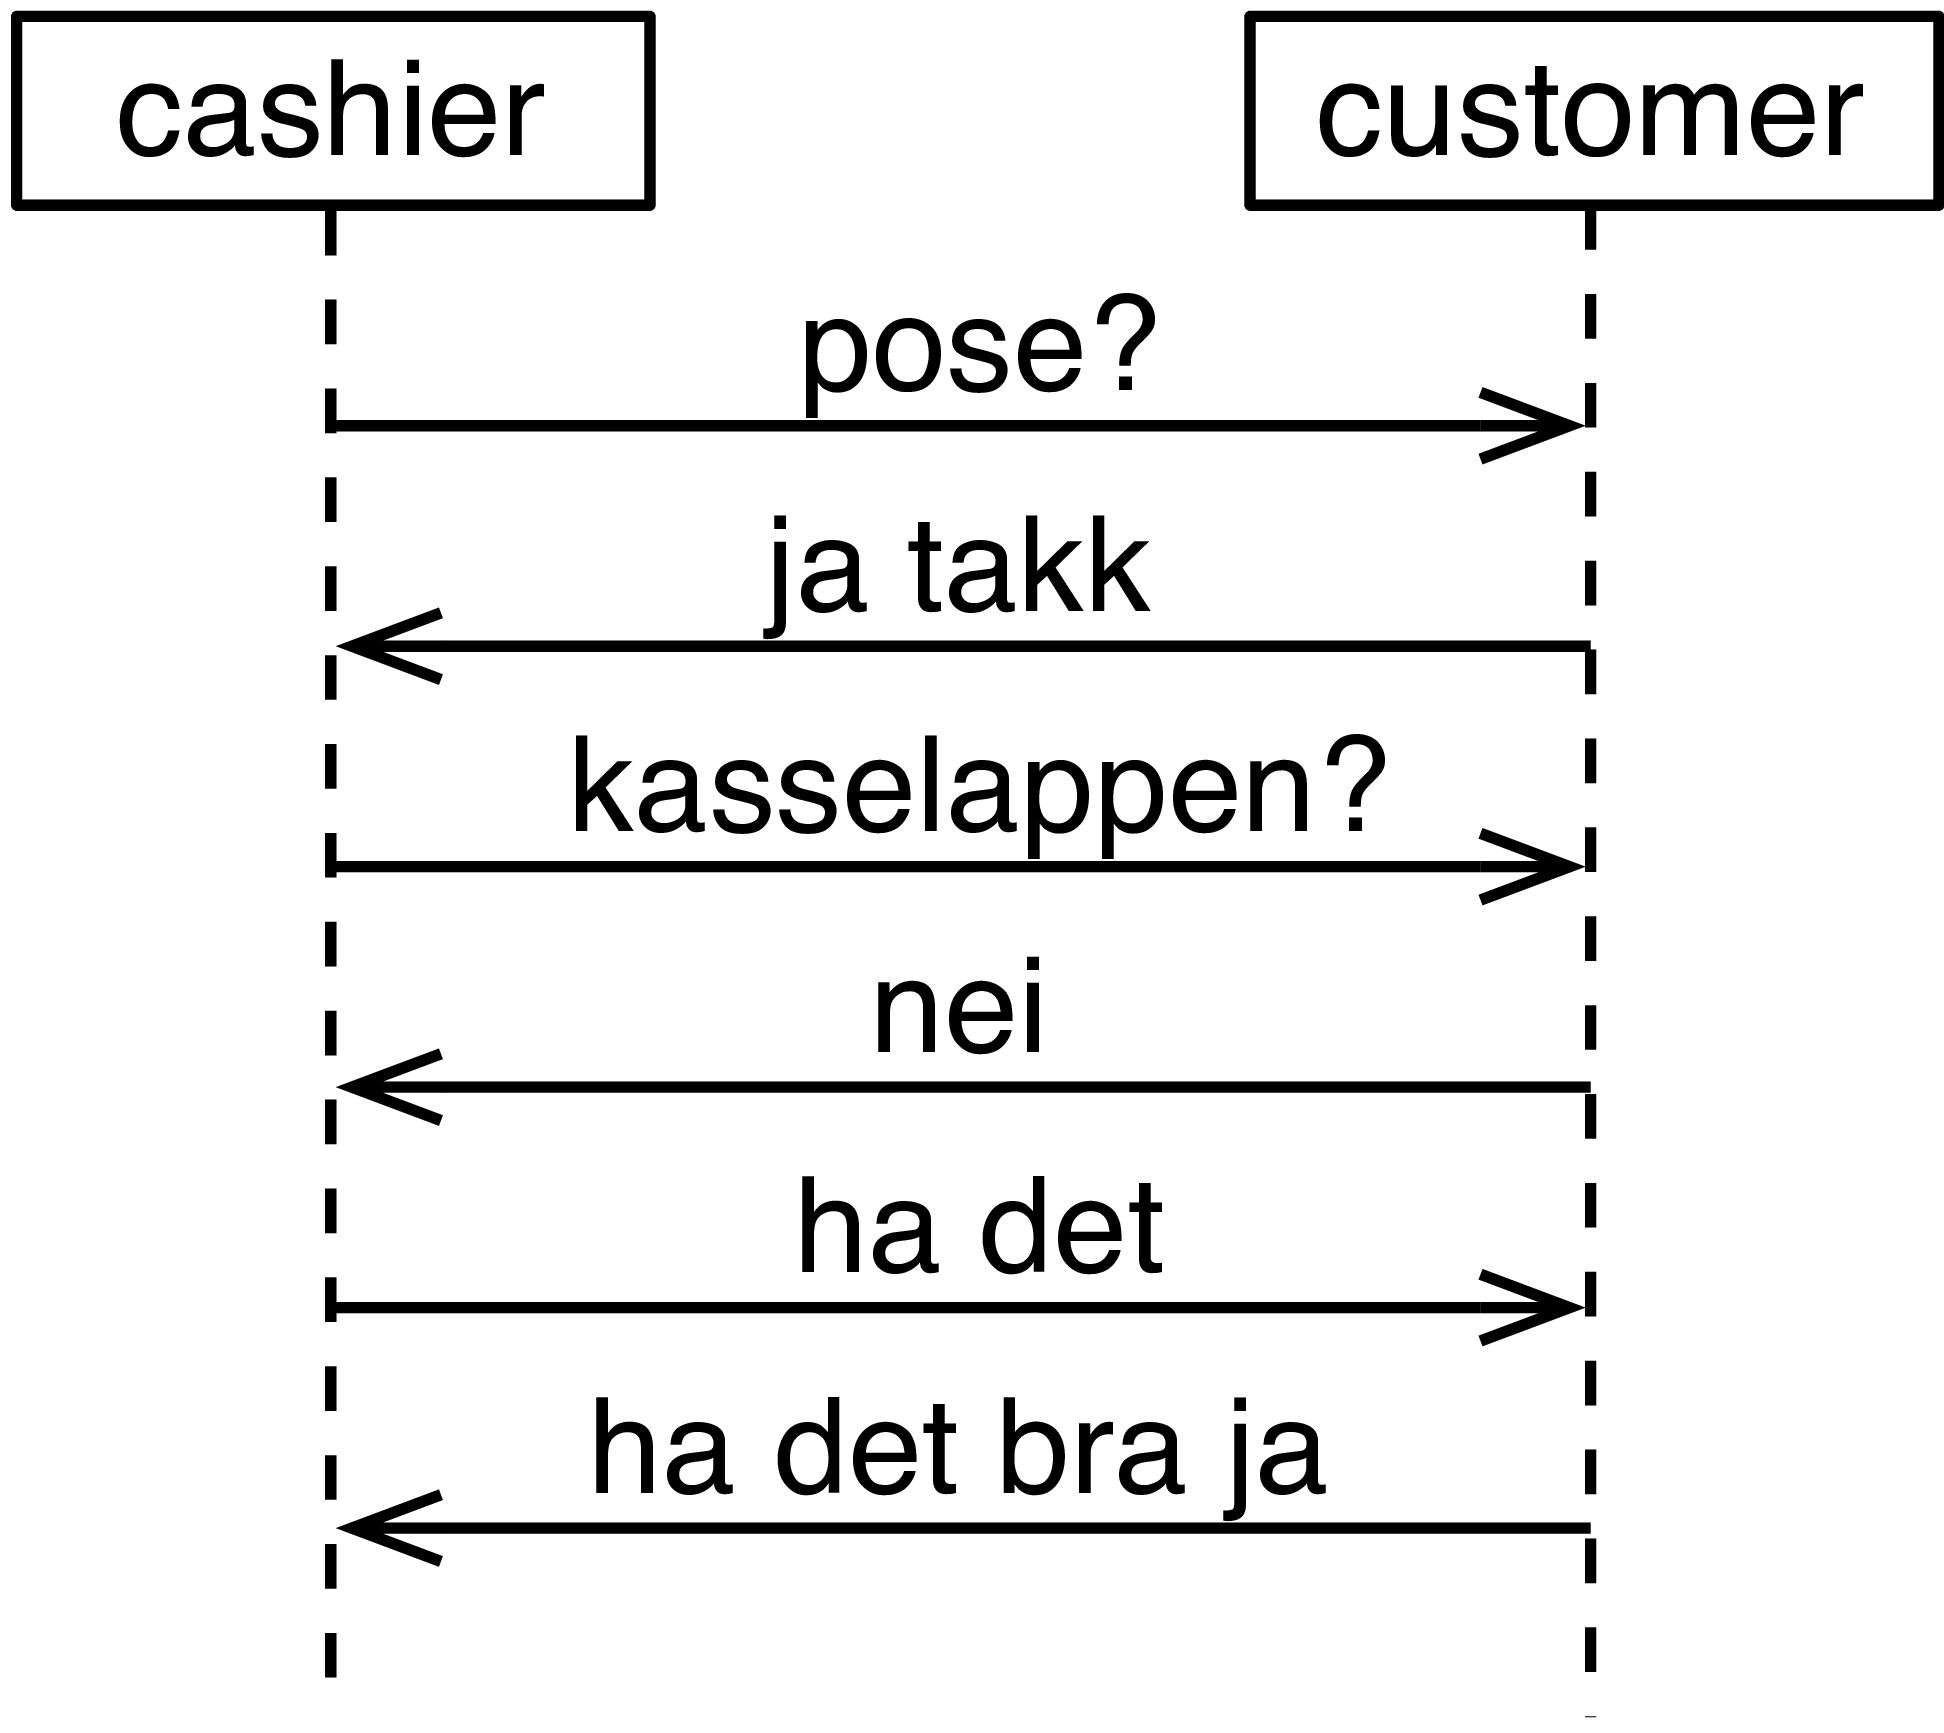 A sequence diagram showing a conversation.